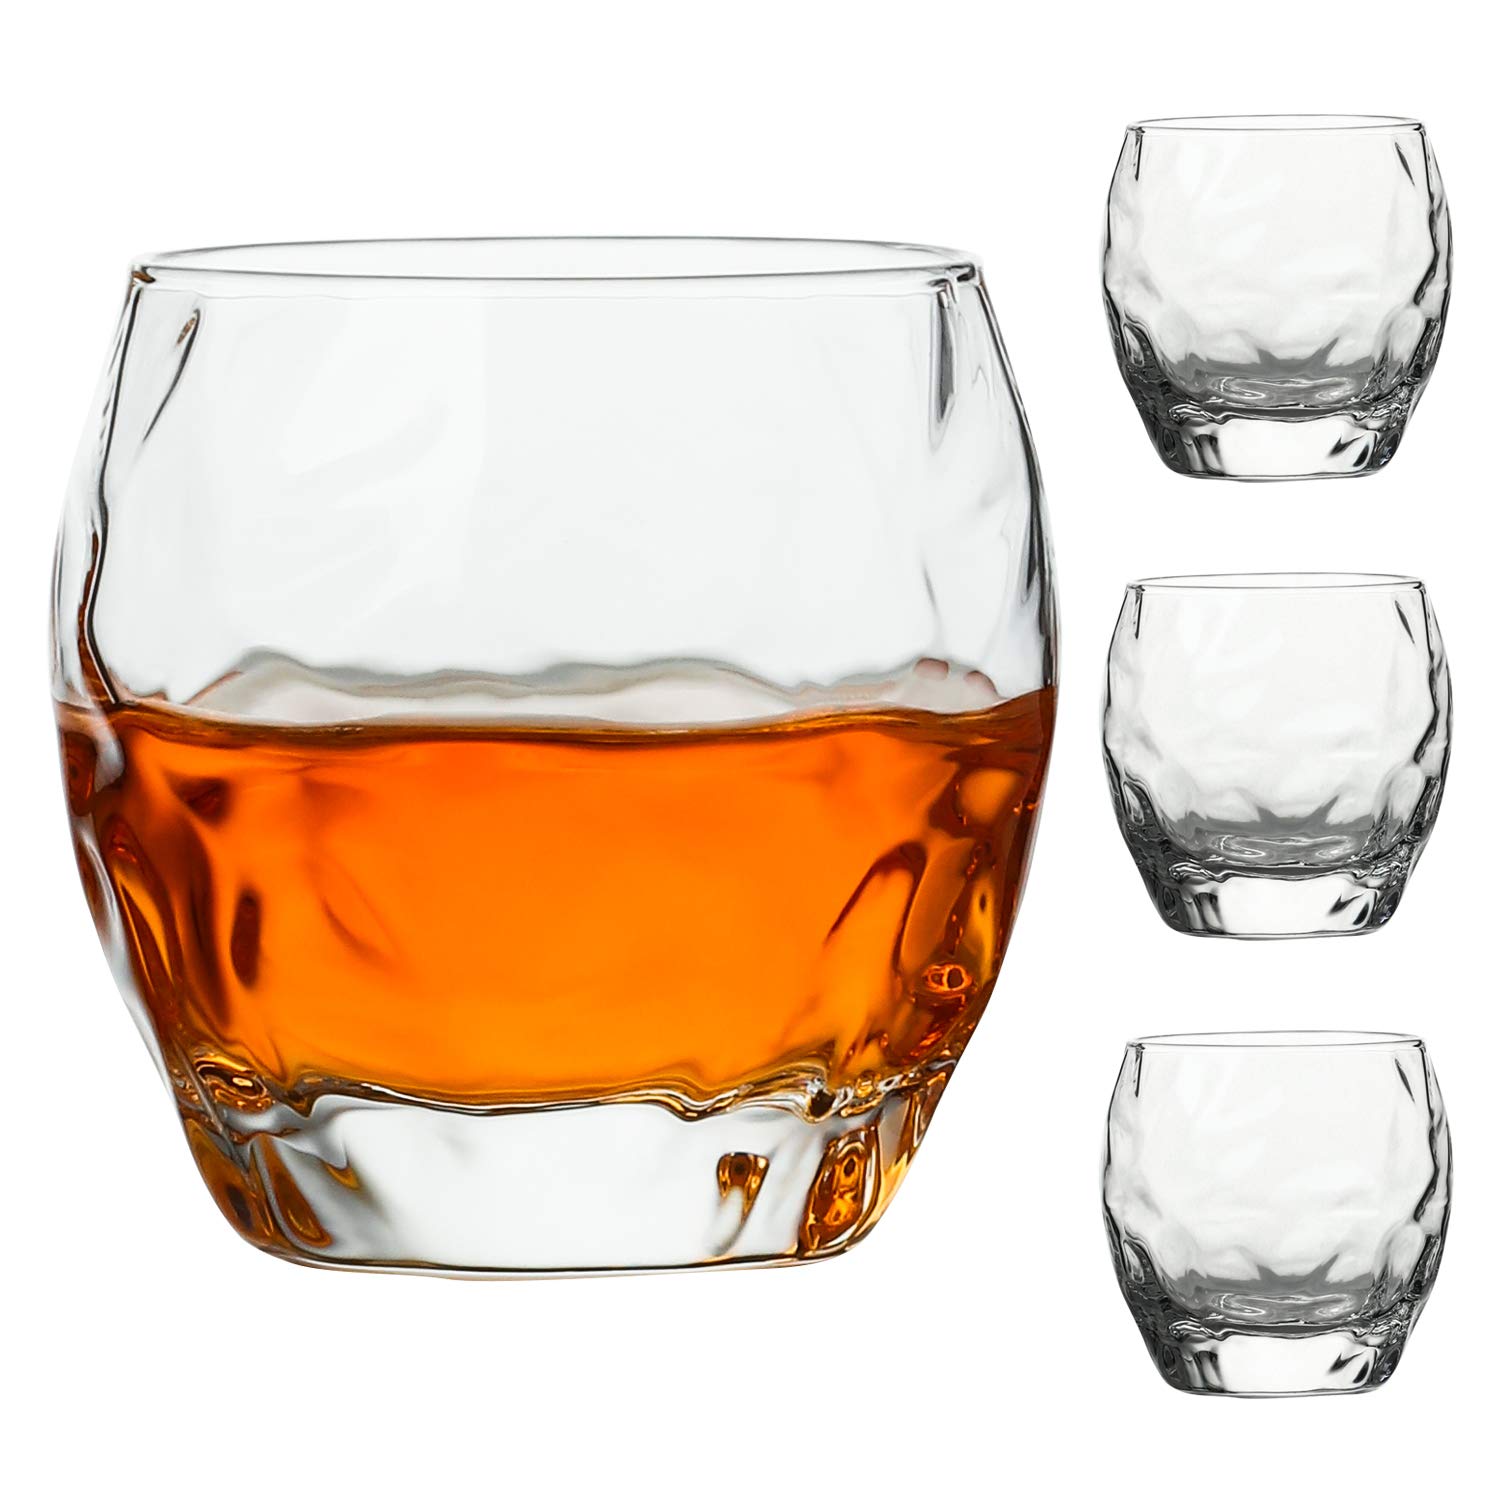 ini TECH Set of 4 Unique Whiskey Glasses 12 oz Scotch Glasses Bourbon Glasses for Cocktails Rock Style Old Fashioned Drinking Glasses Gifts for men (clear, 4)